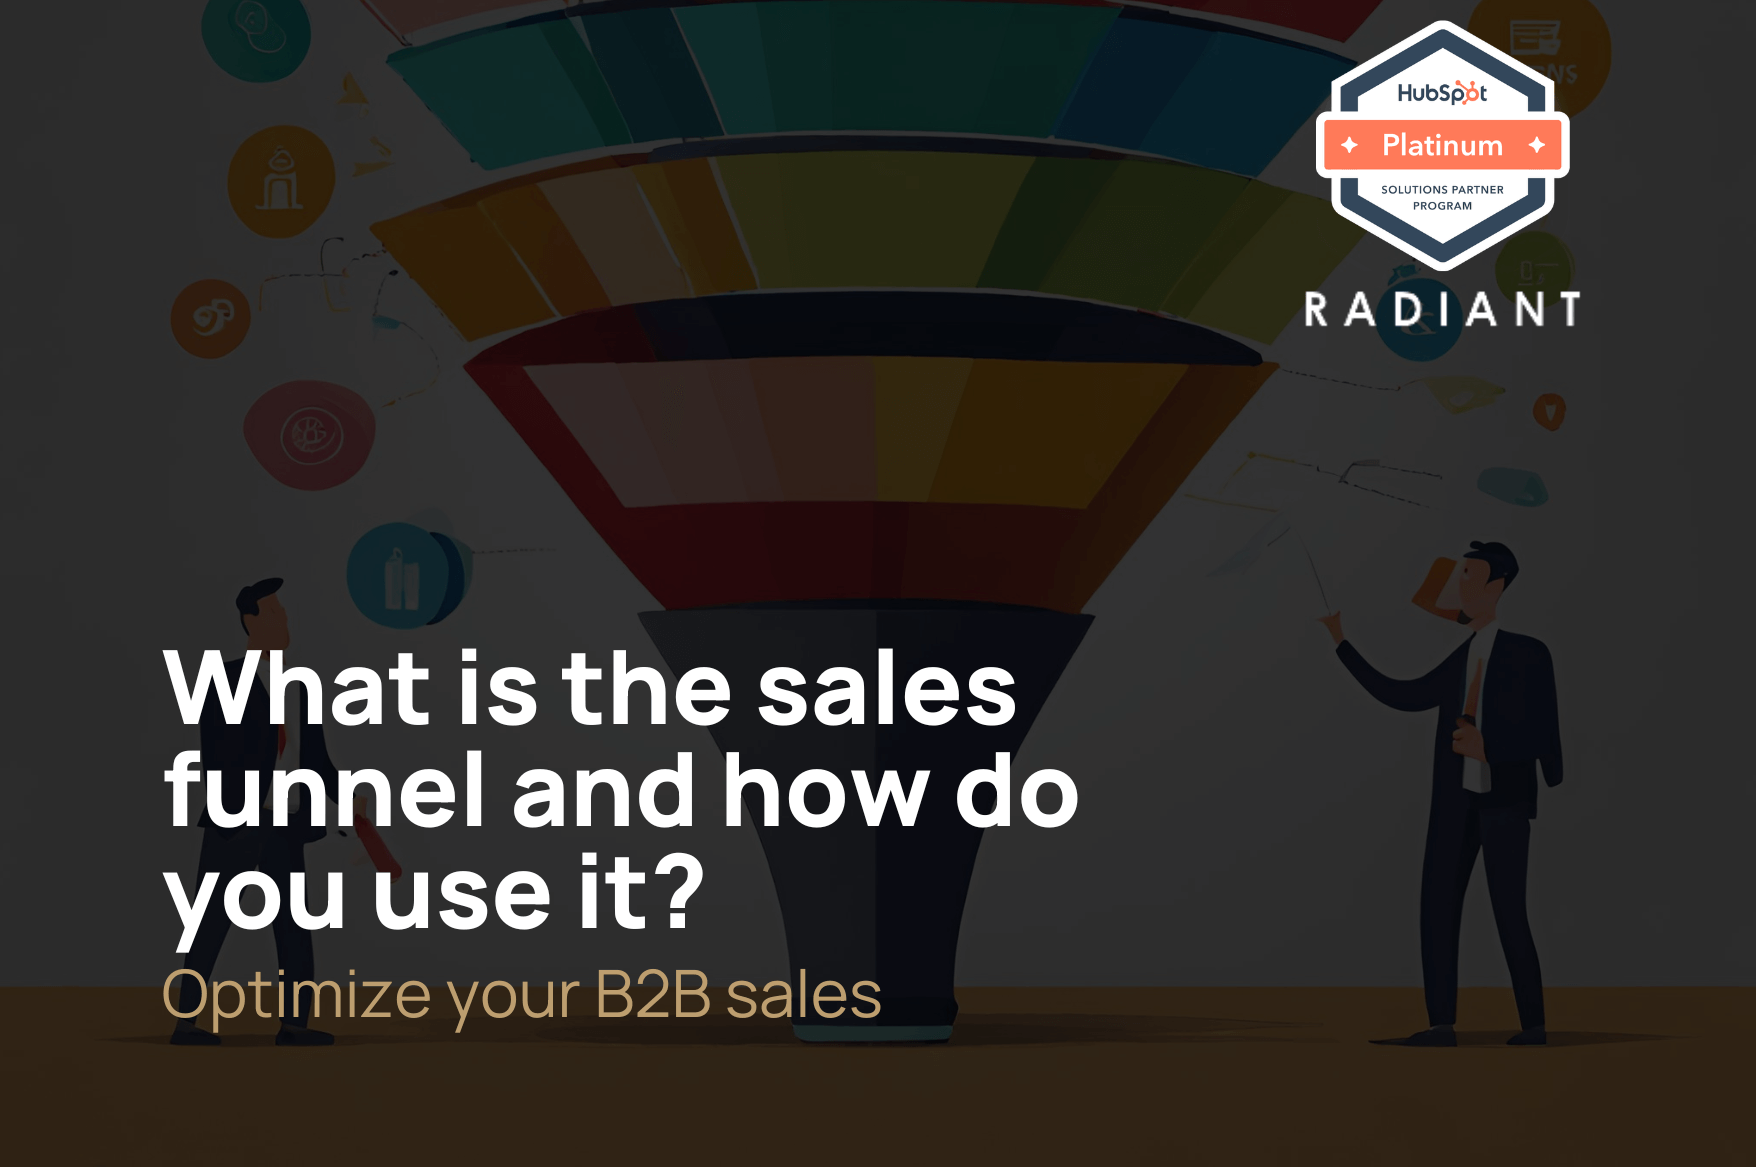 What is the sales funnel and how do you use it?